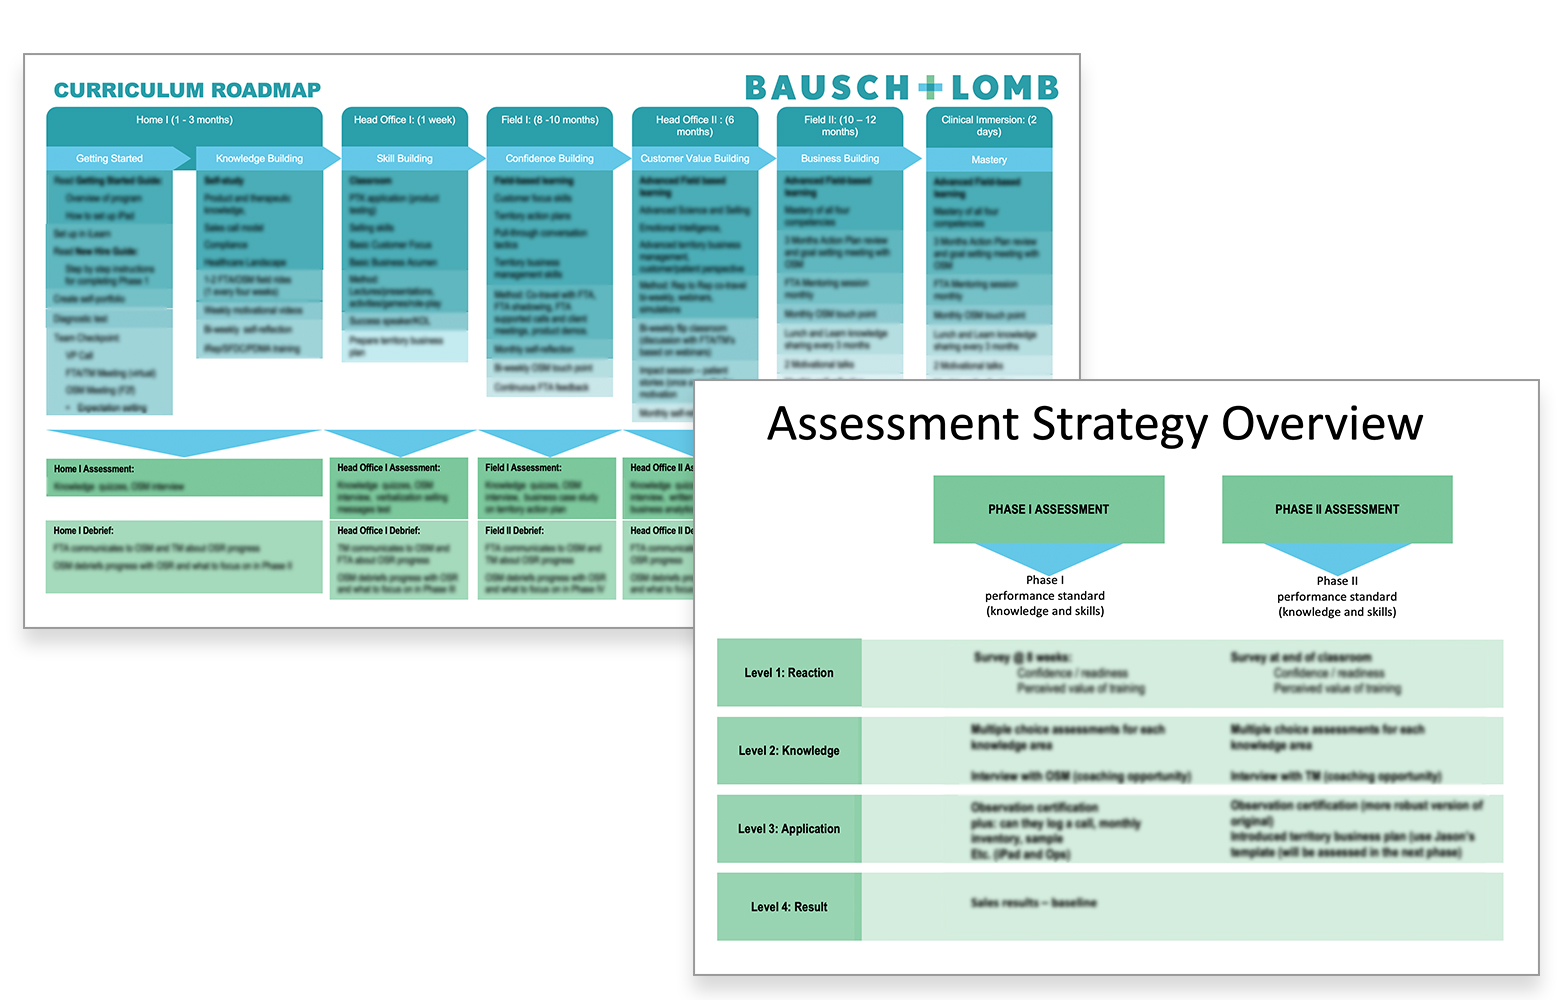 Onboarding Assessment Strategies for Bauch